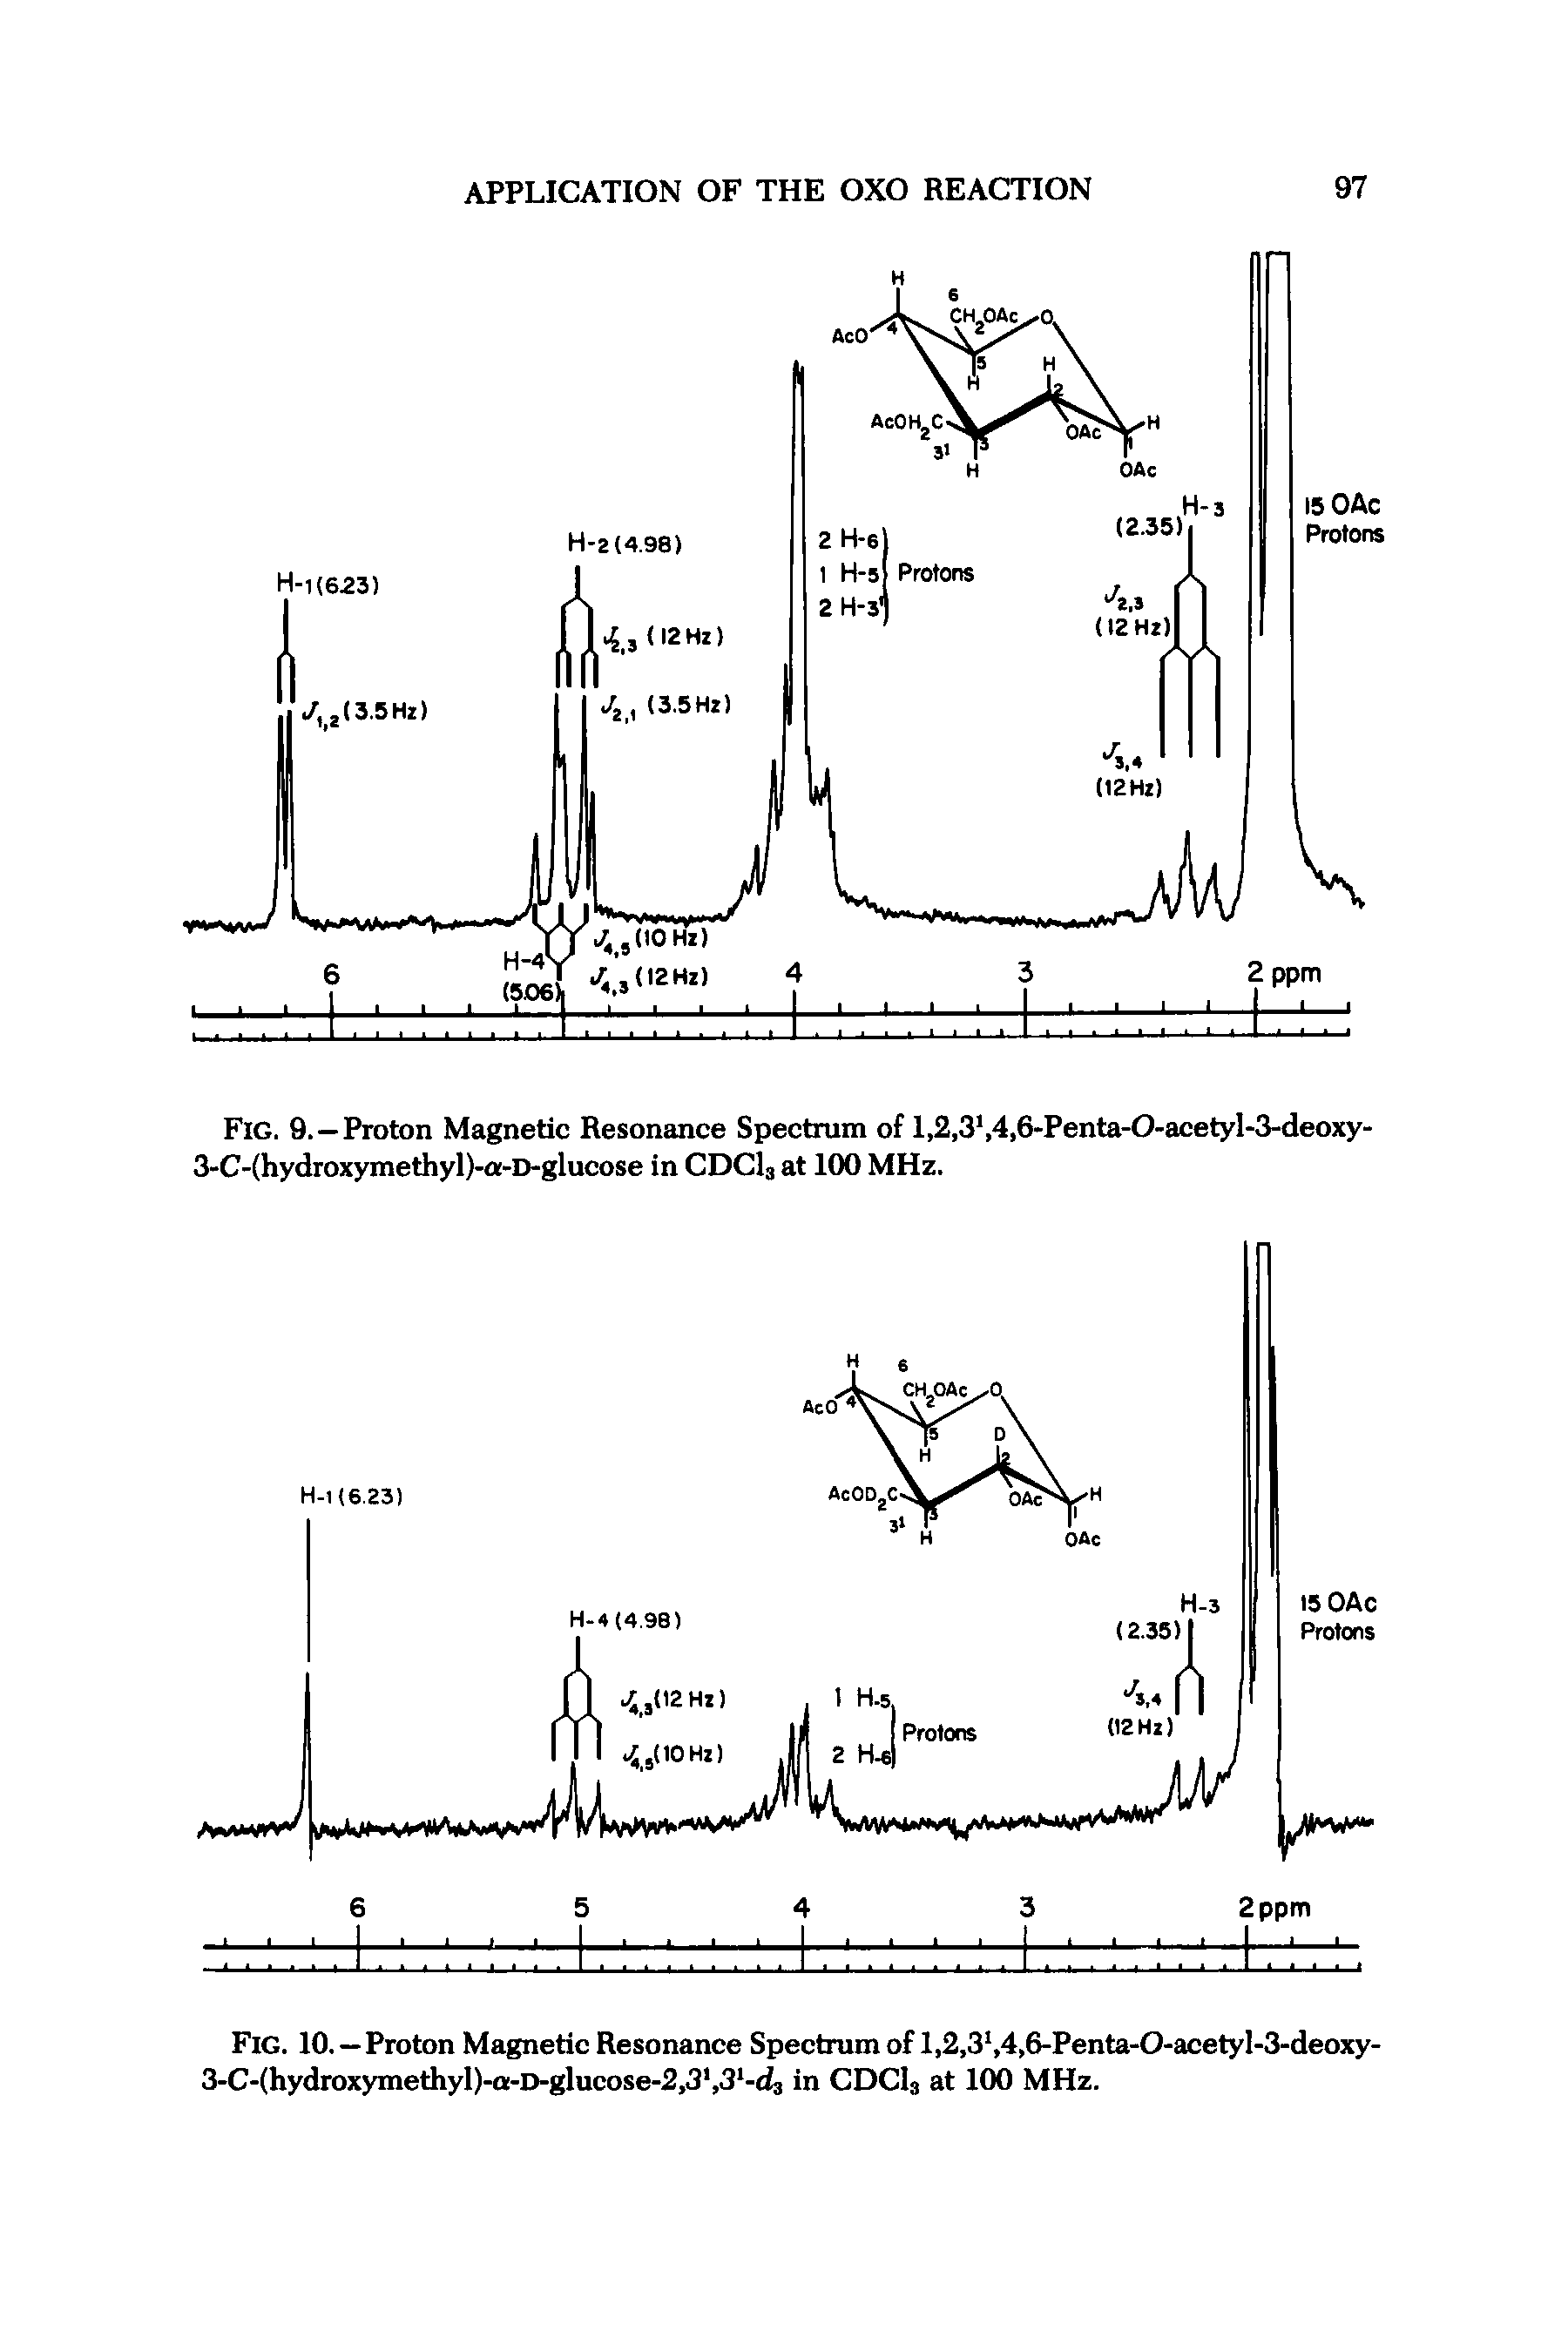 Fig. 9.—Proton Magnetic Resonance Spectrum of l,2,3, 4,6-Penta-0-acetyl-3-deoxy-3-C-(hydroxymethyl)-a-D-glucose in CDCI3 at 100 MHz.